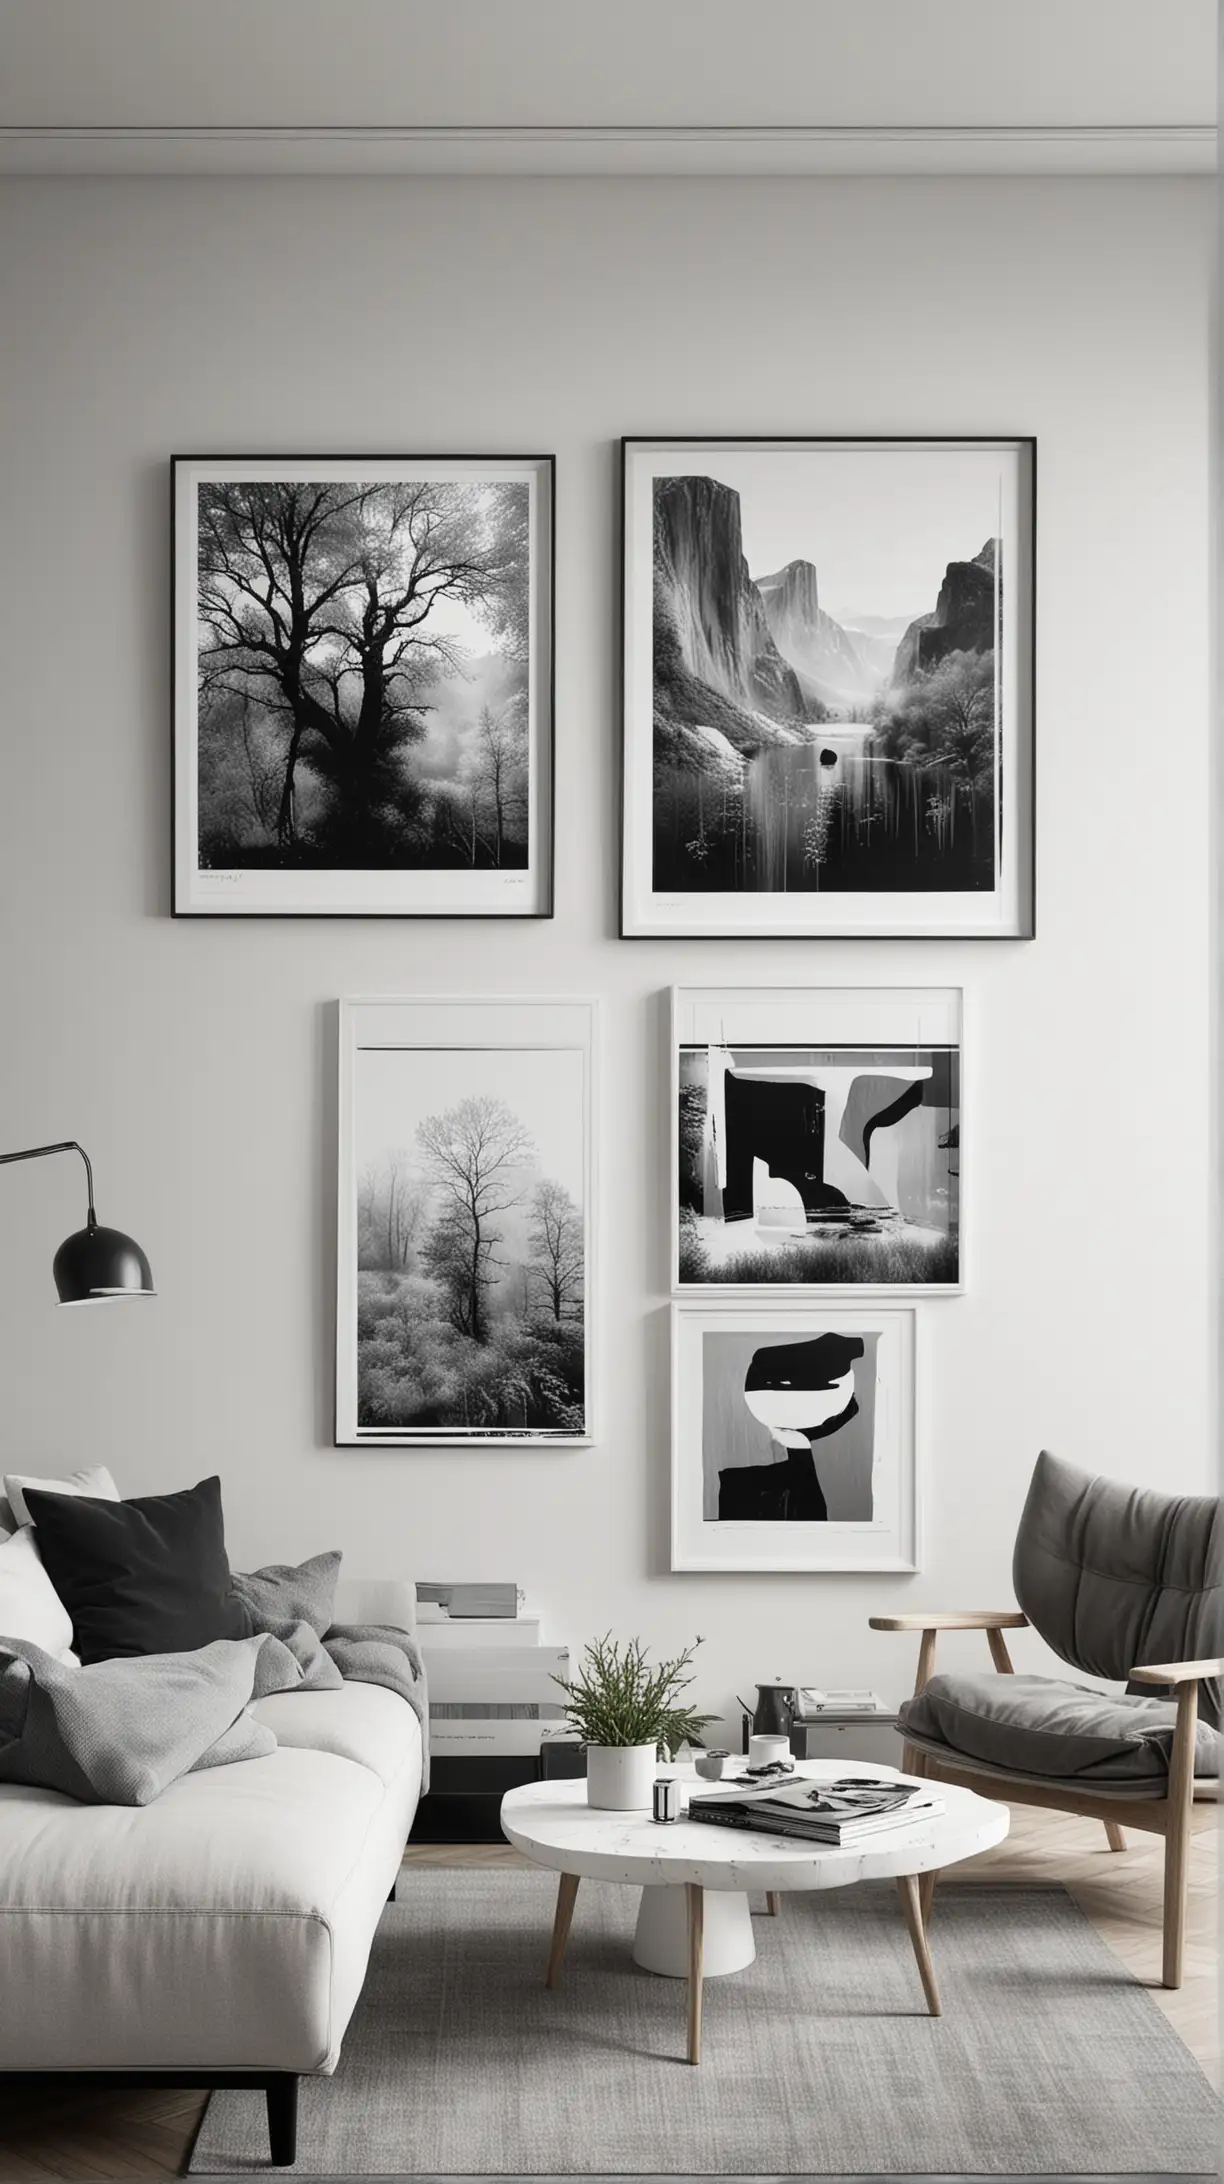 Sophisticated Scandinavian living room decorated with monochromatic artwork, enhancing the minimalist vibe.